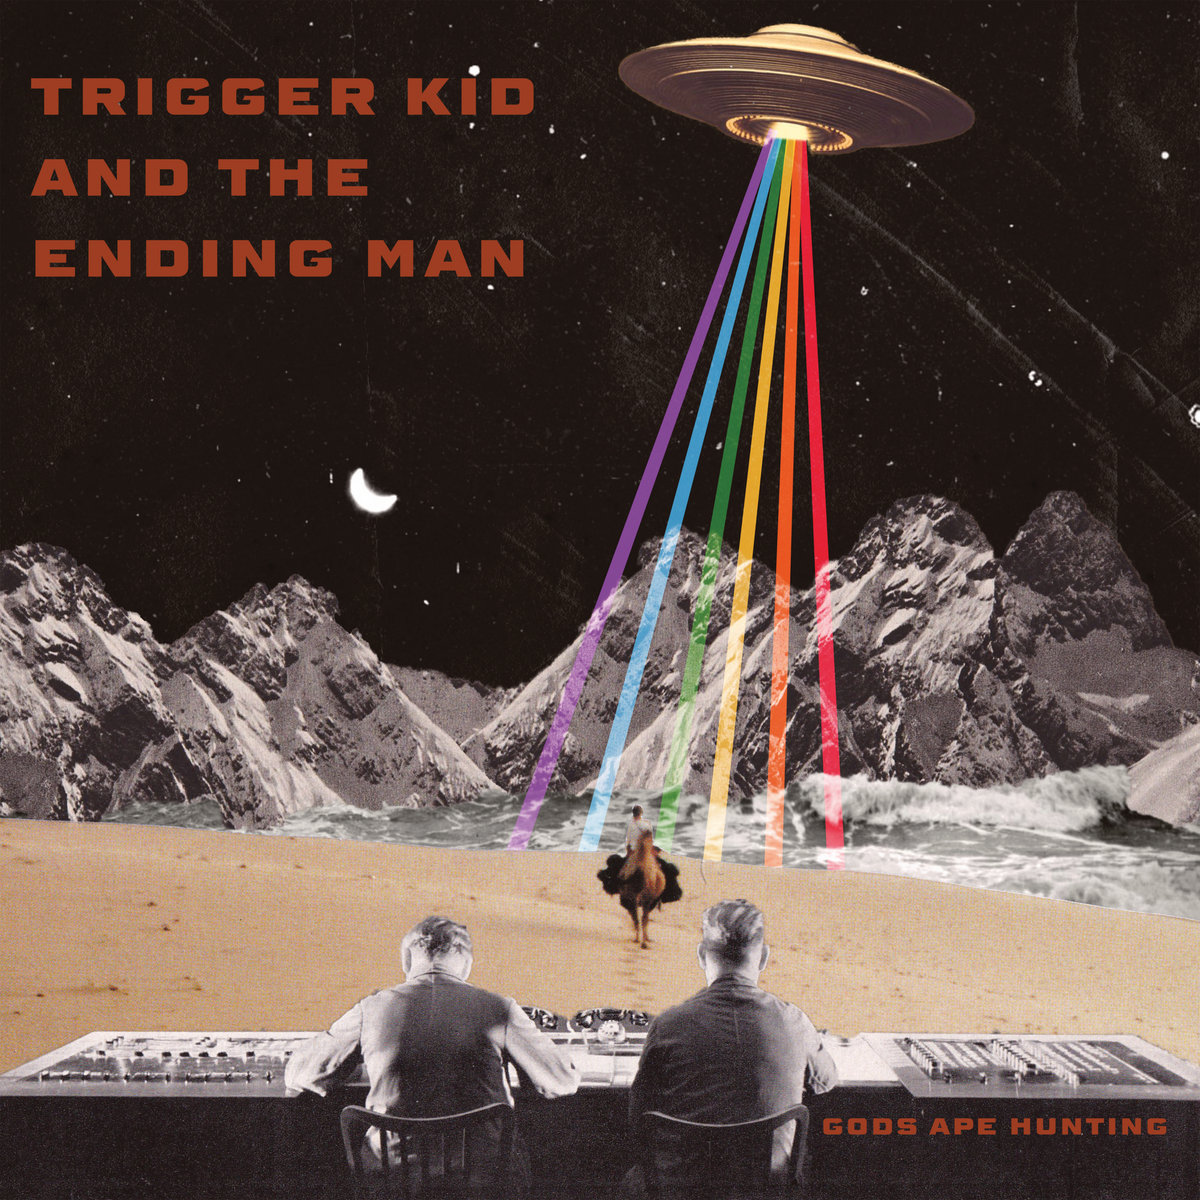 New Music: Gods Ape Hunting by Trigger Kid & The Ending Man